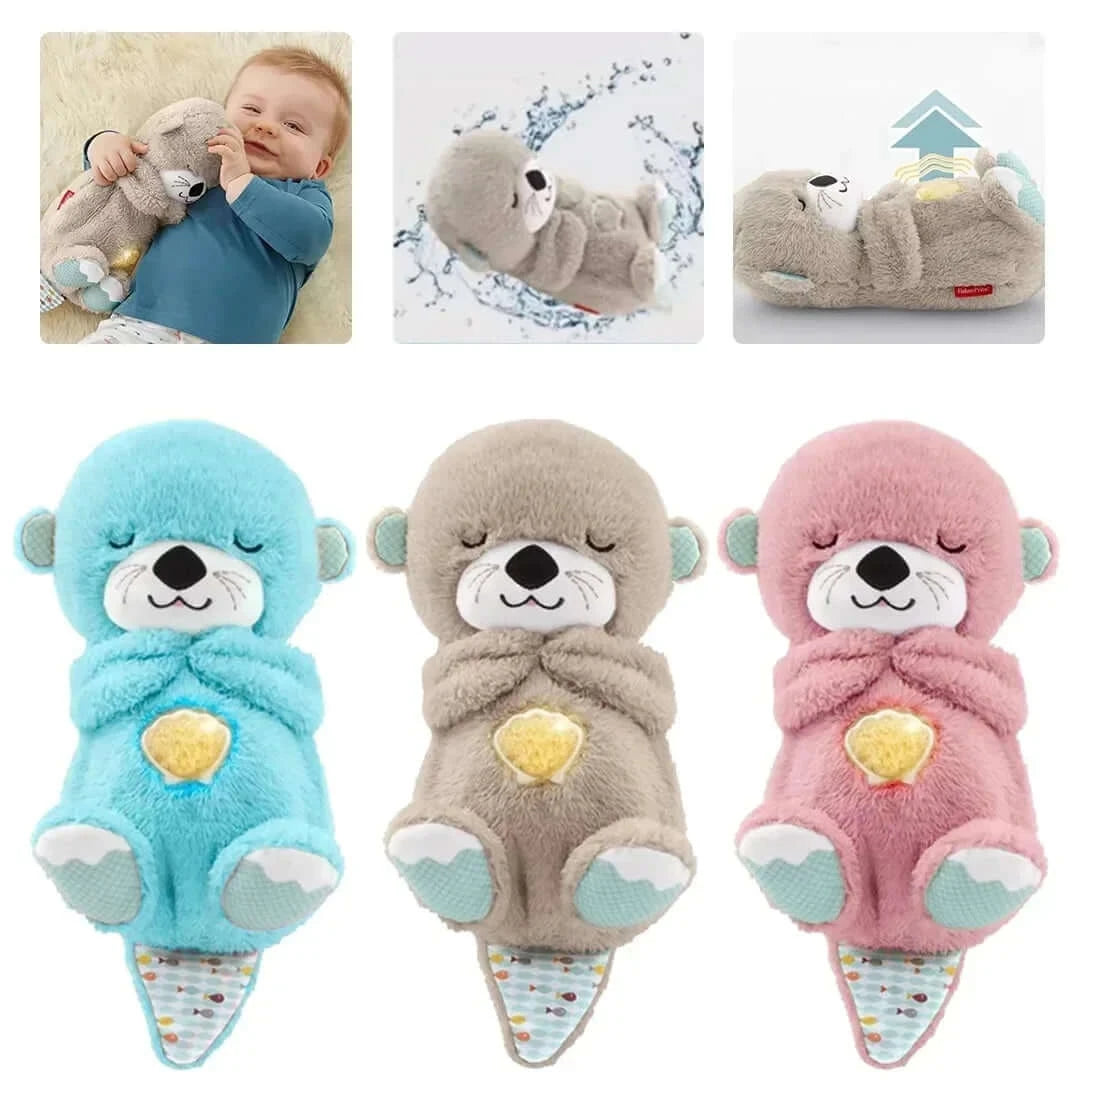 Dreamy Otter Sleepytime Plush Toy - Baby Comfort Pillow and Music Box | $99.95